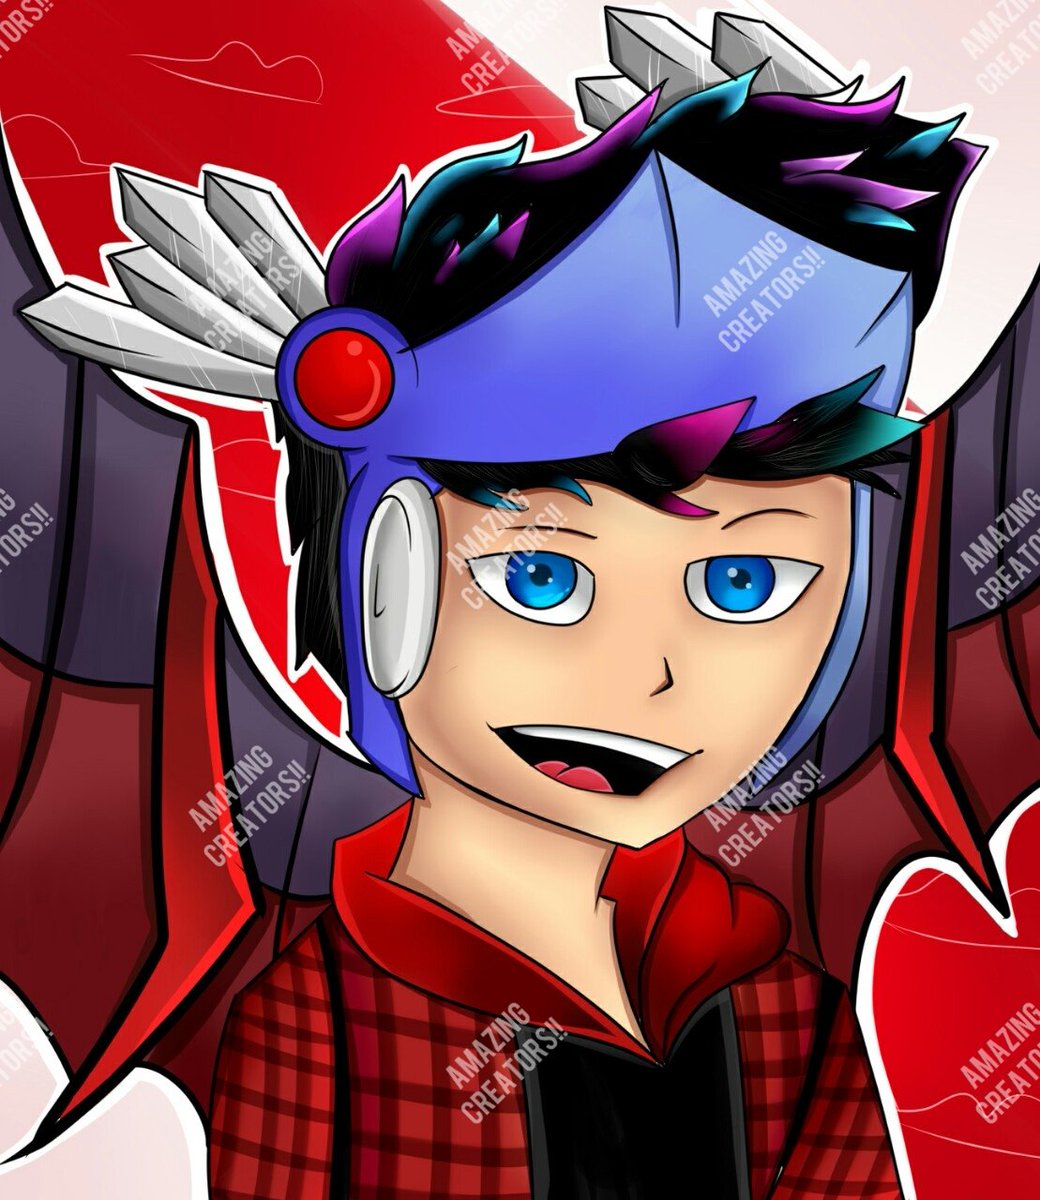 Amazingcreatorz On Twitter This Is One Of The Best Arts We Ve Done So Do You Need This Types Of Pfp S For The Giveaway Prize That S Me Btw With A Valkyrie - roblox red valkyrie helm